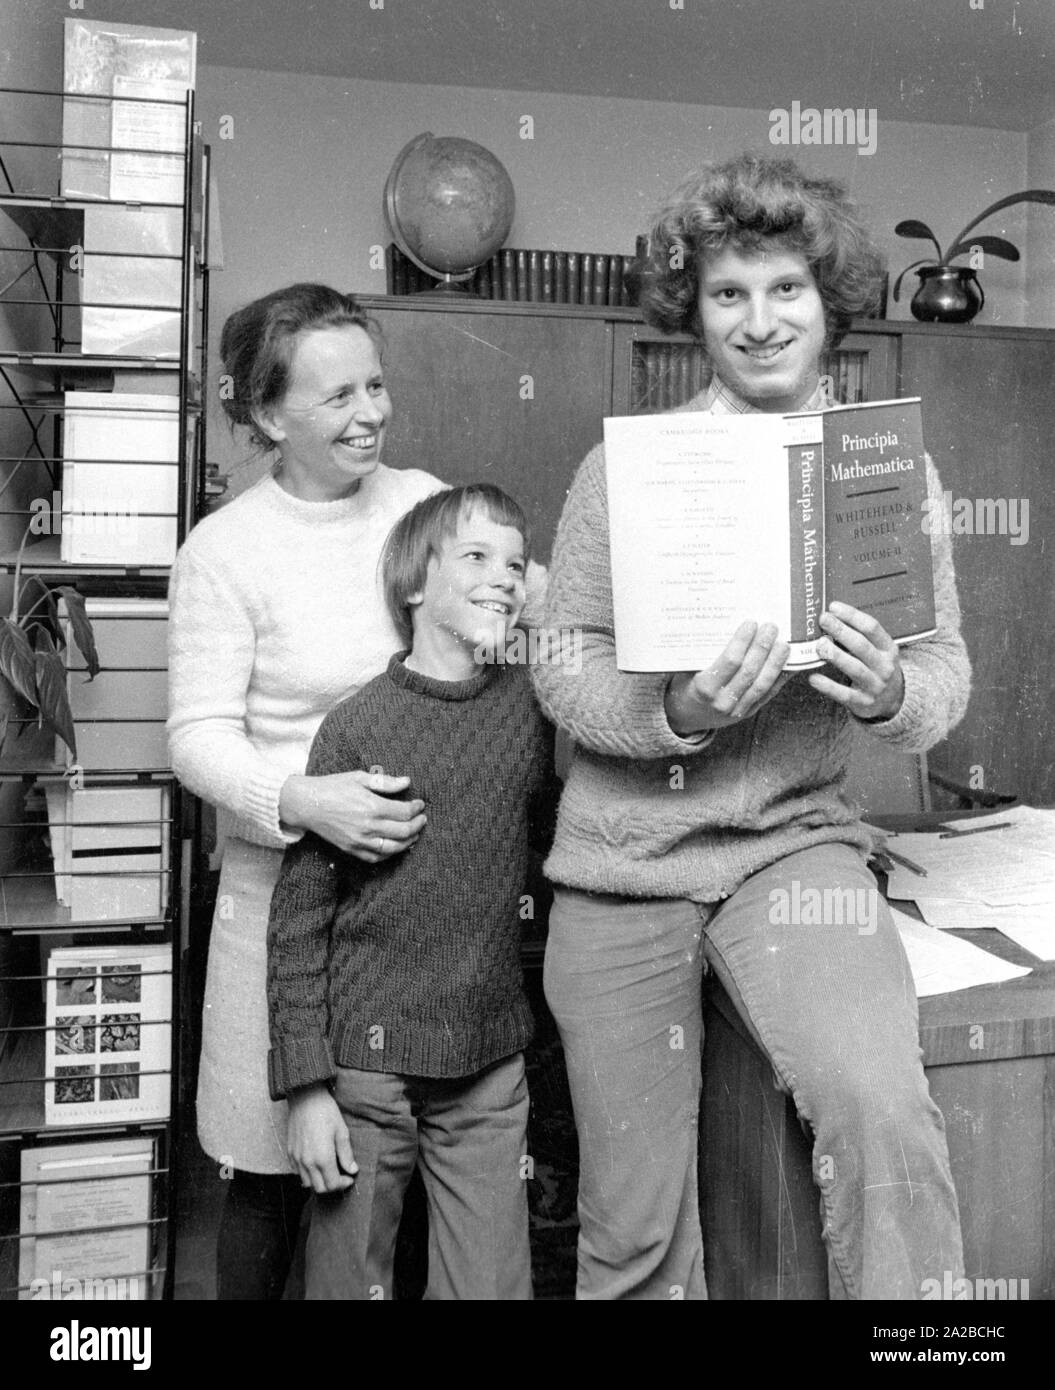 Computing wonder Elmar Eder (r.) with a math book. Next to him is probably his mother Elfie and his brother Raimund. Stock Photo